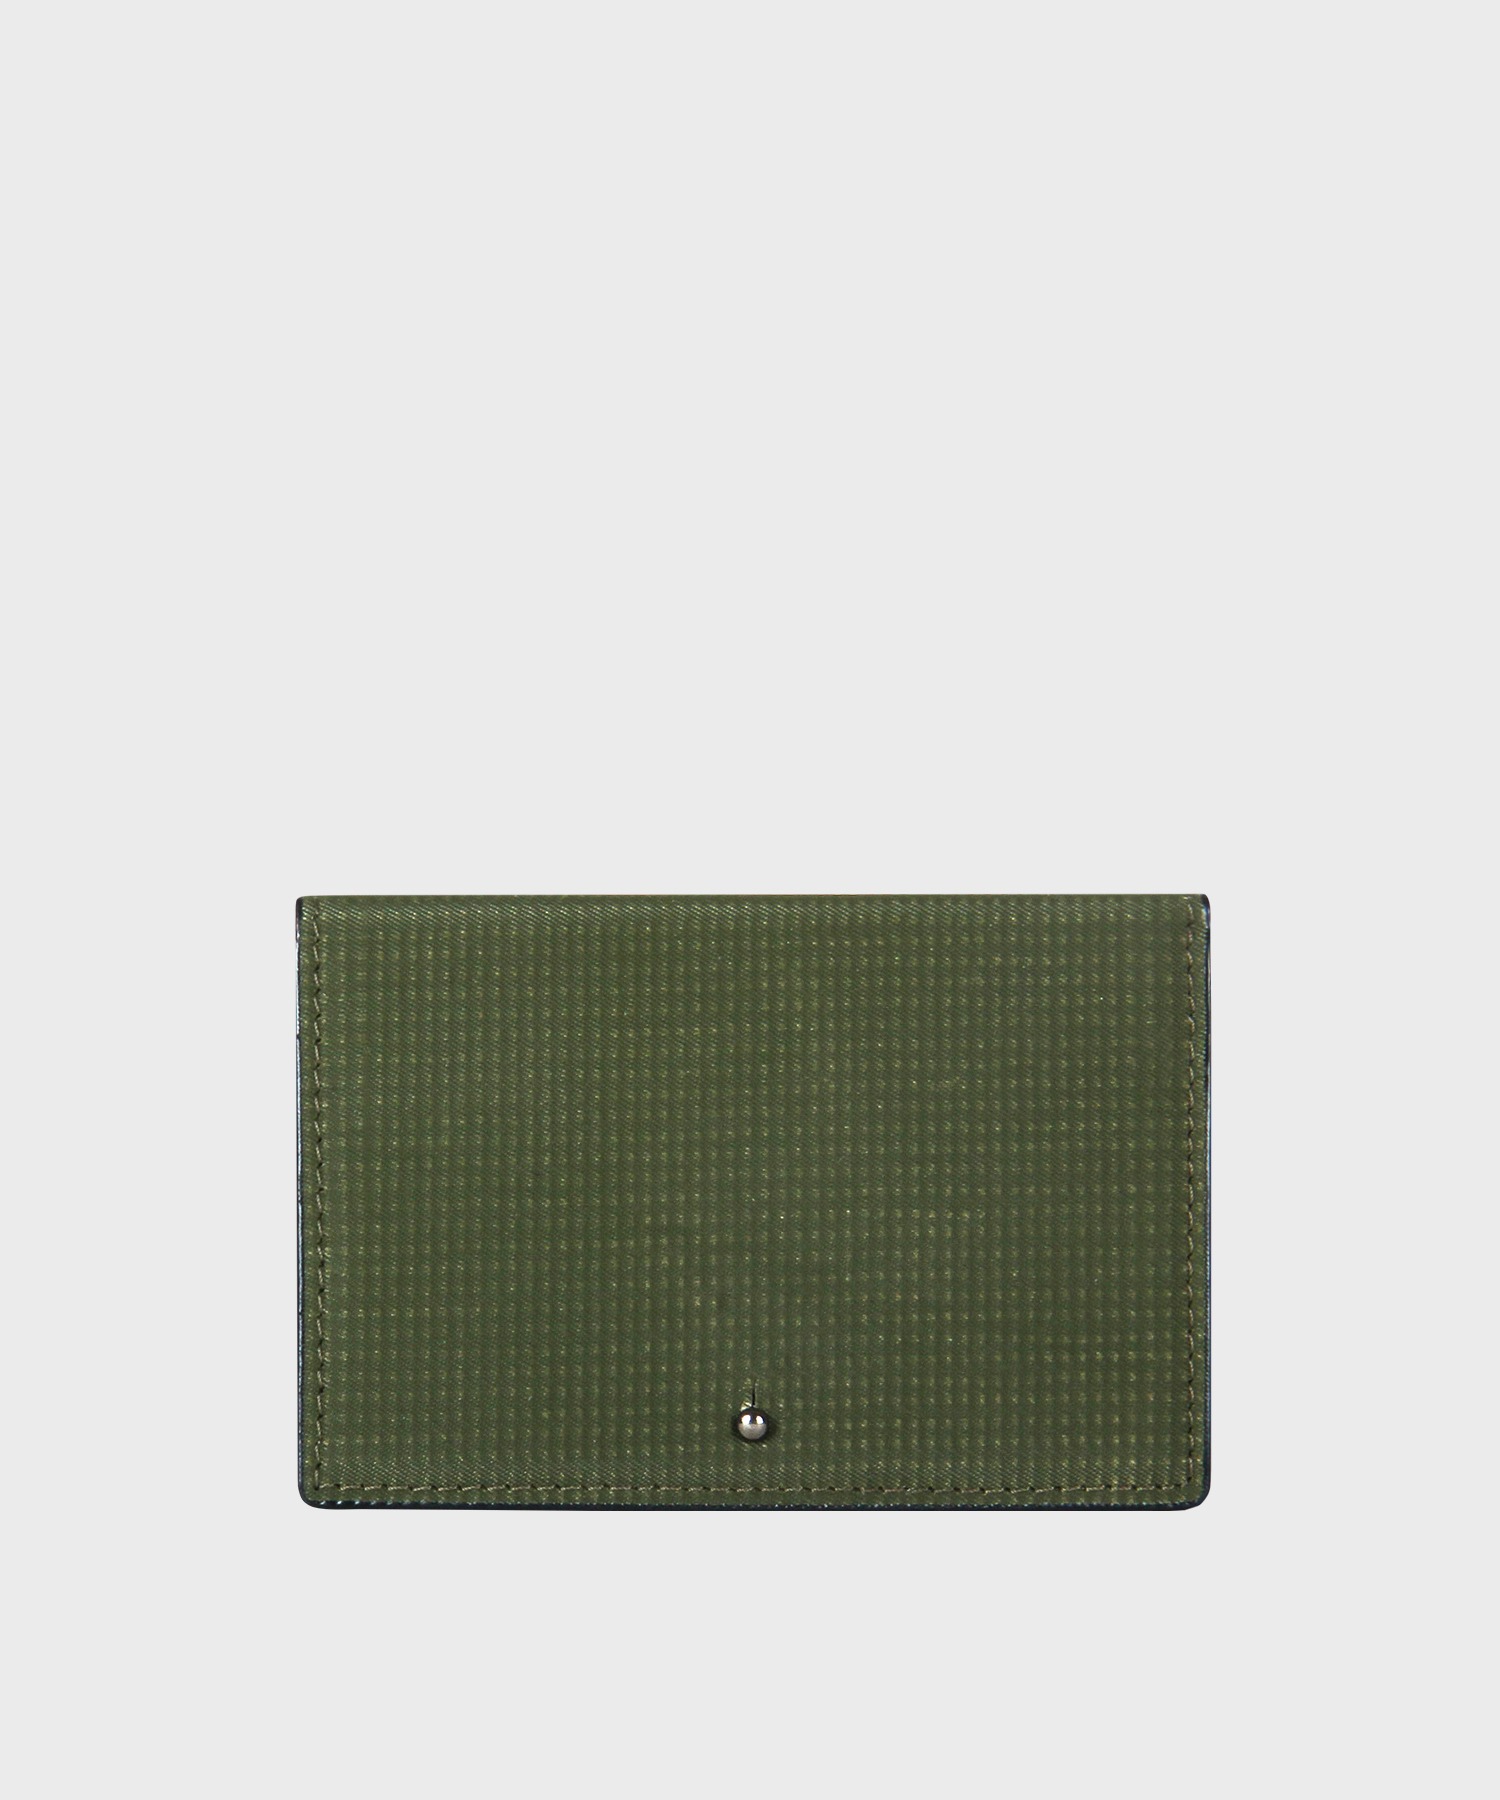 OM BUTTON STUD WALLET (OLIVE DRAB) / UPCYCLED